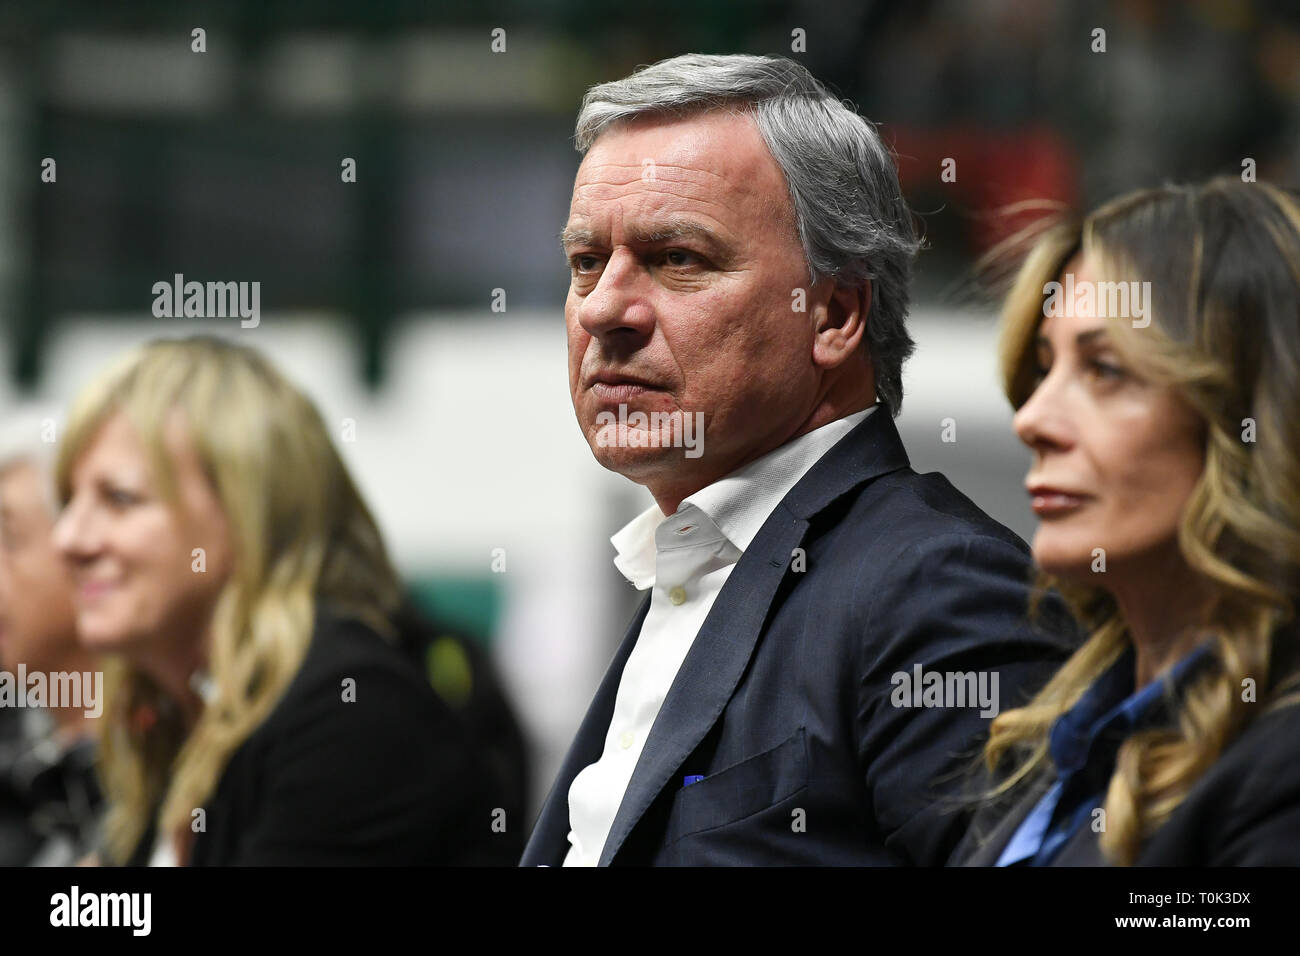 Candy Arena, Monza, Italy. 20th March, 2019. CEV Volleyball Challenge Cup men, Final, 1st leg. Dario Allevi, Monza's Mayor during the match between Vero Volley Monza and Belogorie Belgorod at the Candy Arena Italy.  Credit: Claudio Grassi/Alamy Live News Stock Photo